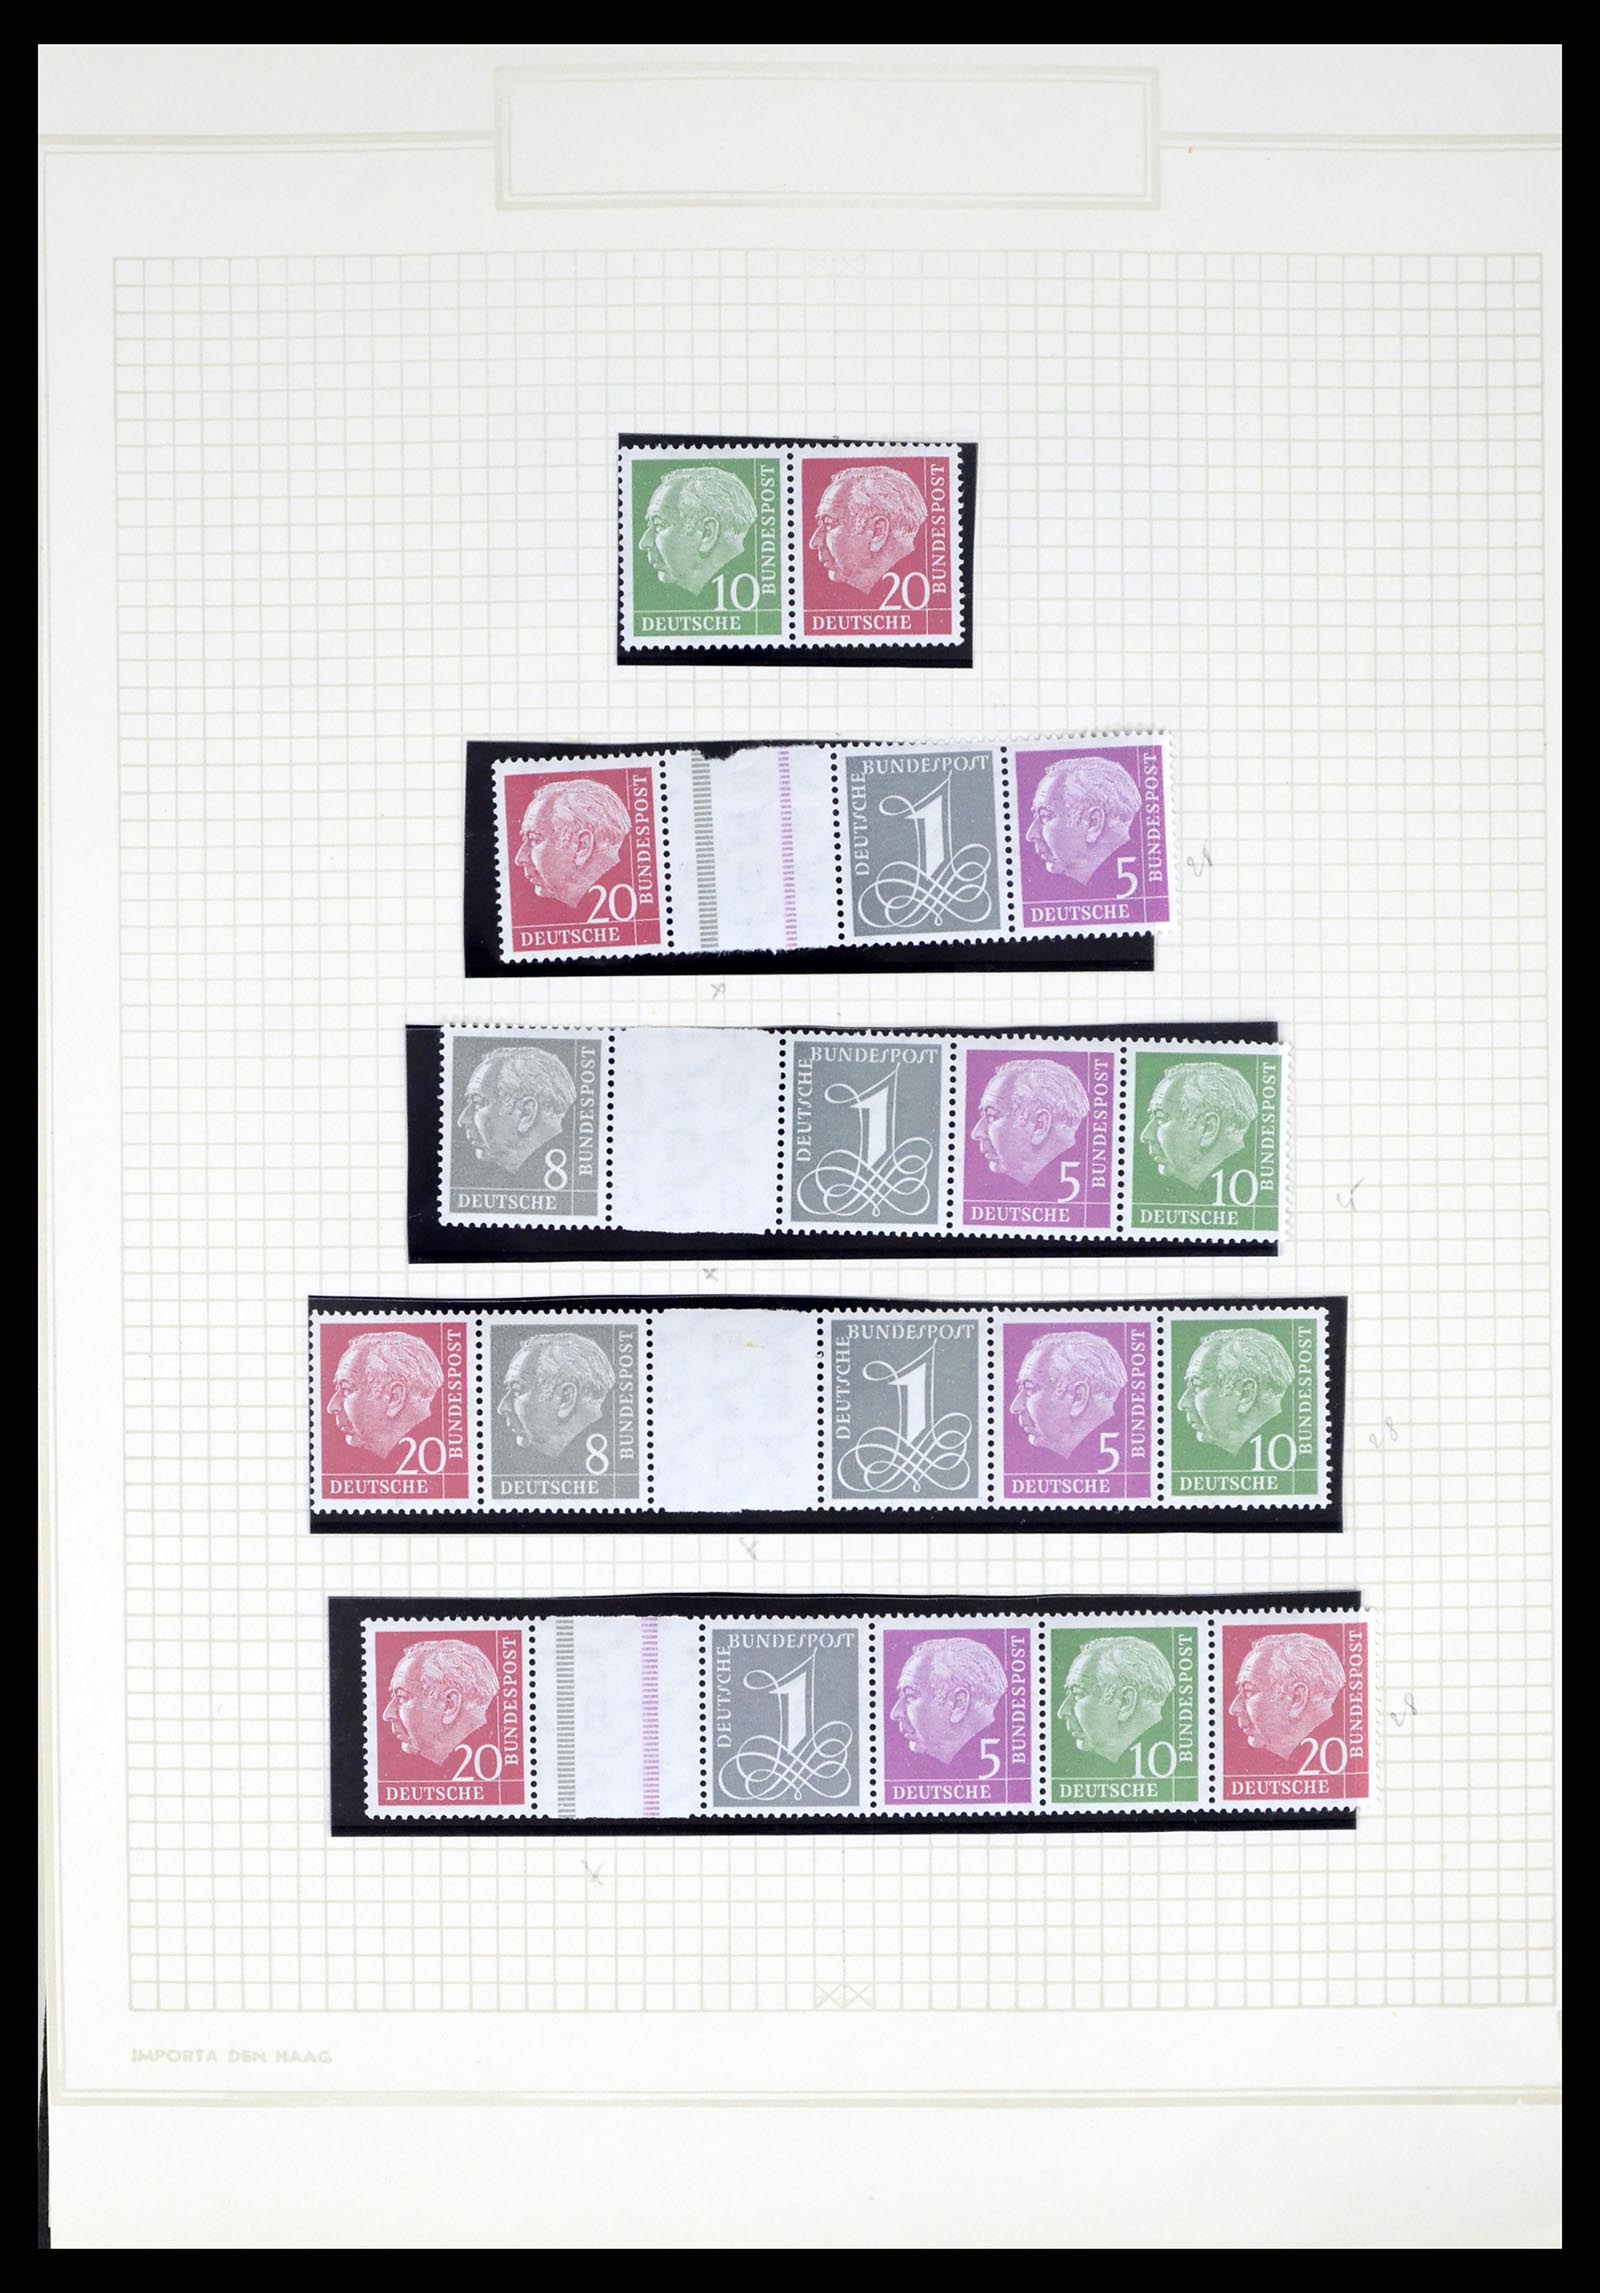 37354 043 - Stamp collection 37354 Bundespost and Berlin 1955-2000.